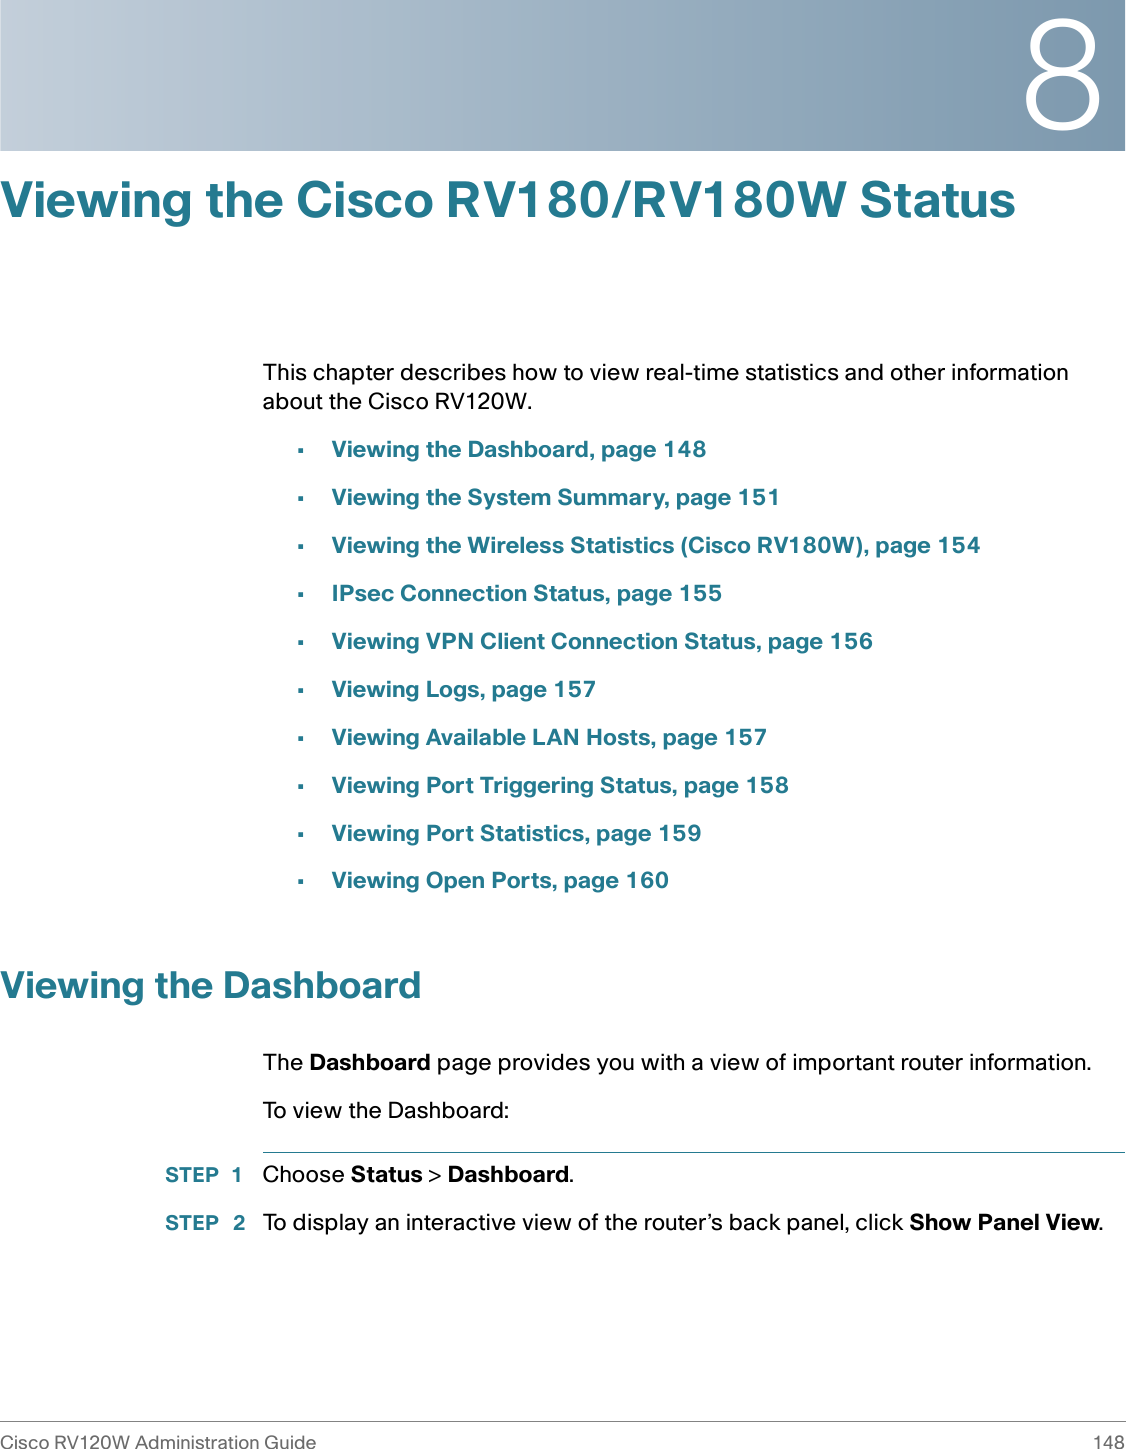 8Cisco RV120W Administration Guide 148 Viewing the Cisco RV180/RV180W StatusThis chapter describes how to view real-time statistics and other information about the Cisco RV120W.•Viewing the Dashboard, page 148•Viewing the System Summary, page 151•Viewing the Wireless Statistics (Cisco RV180W), page 154•IPsec Connection Status, page 155•Viewing VPN Client Connection Status, page 156•Viewing Logs, page 157•Viewing Available LAN Hosts, page 157•Viewing Port Triggering Status, page 158•Viewing Port Statistics, page 159•Viewing Open Ports, page 160Viewing the DashboardThe Dashboard page provides you with a view of important router information.To view the Dashboard:STEP 1 Choose Status &gt; Dashboard. STEP  2 To display an interactive view of the router’s back panel, click Show Panel View.